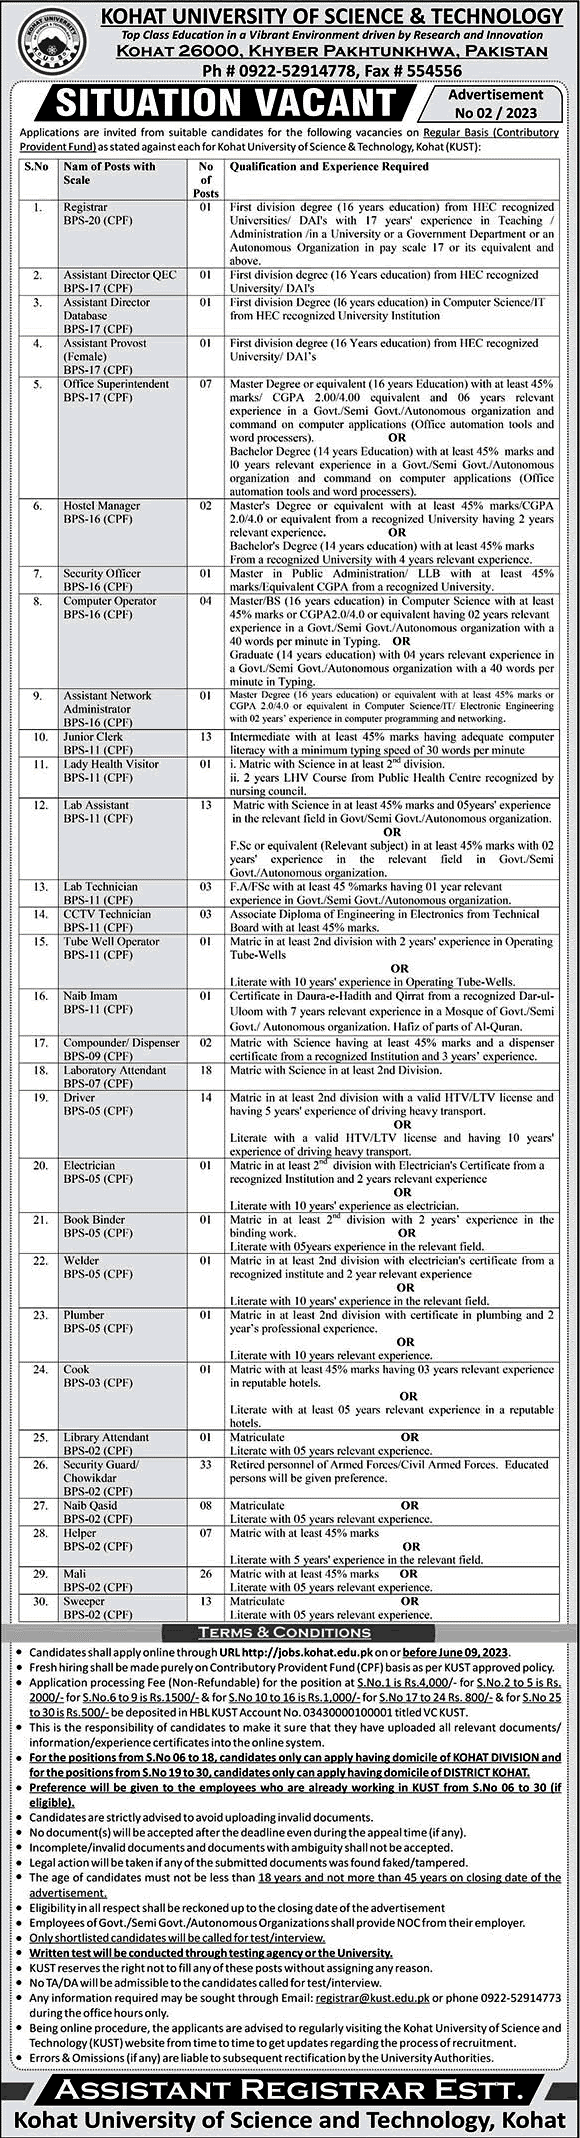 Kohat University of Science and Technology Jobs 2023